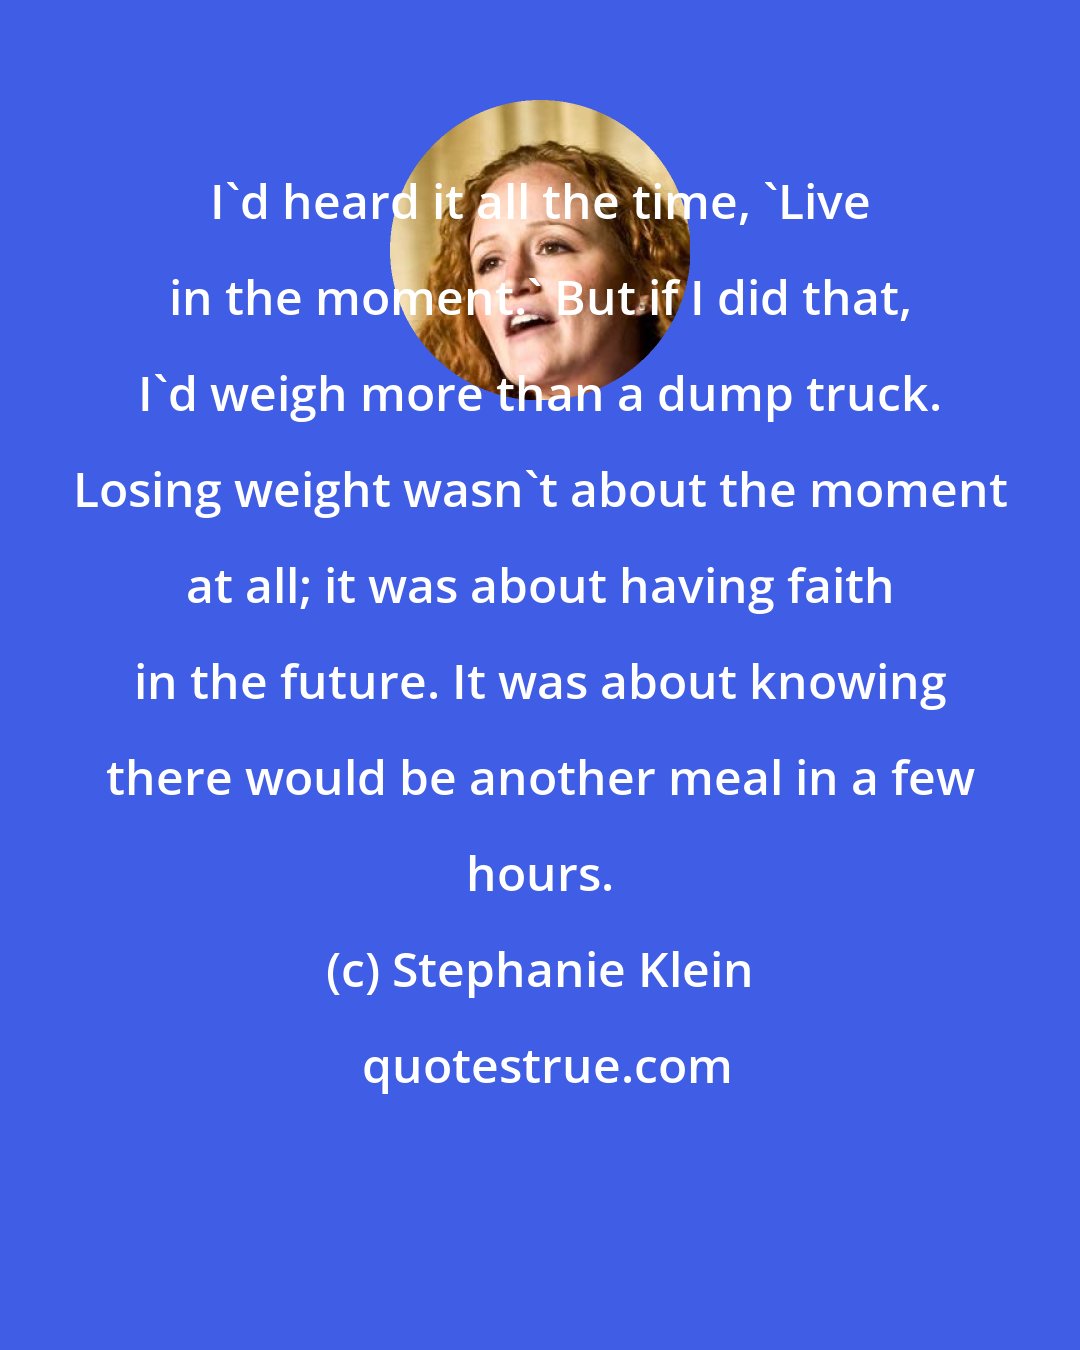 Stephanie Klein: I'd heard it all the time, 'Live in the moment.' But if I did that, I'd weigh more than a dump truck. Losing weight wasn't about the moment at all; it was about having faith in the future. It was about knowing there would be another meal in a few hours.